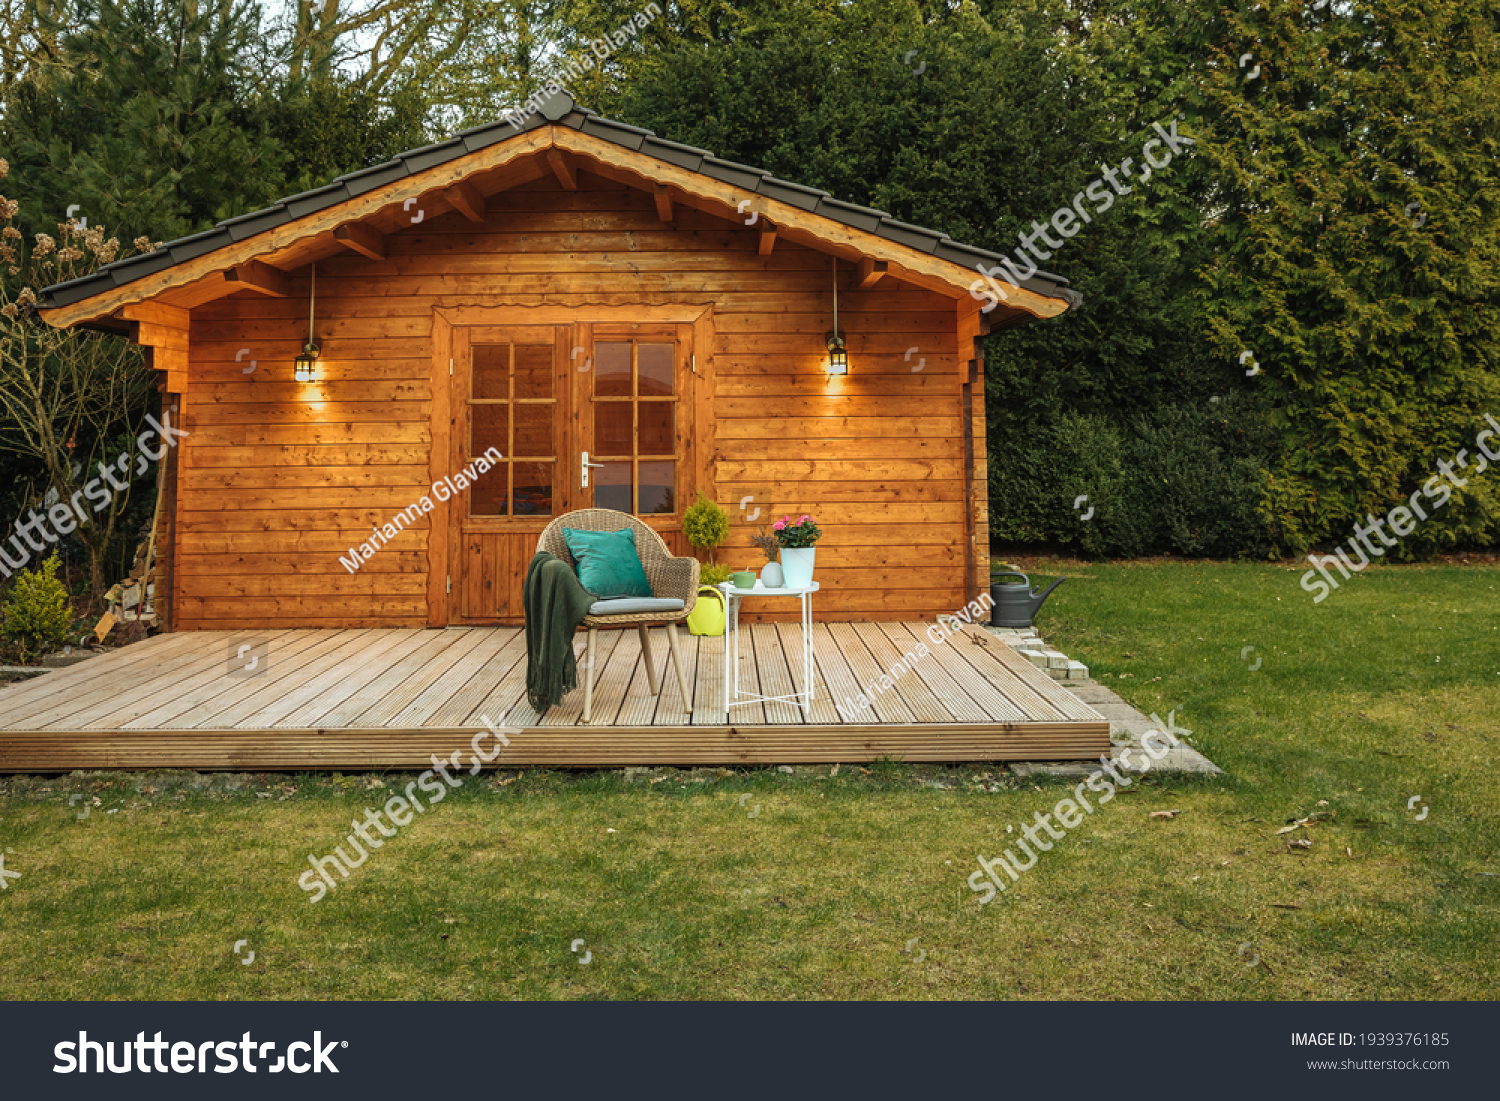 Wooden hut in spring. Drink tea in the garden when the weather is nice. Garden shed for vacation. Nice garden in Germany.  #1939376185